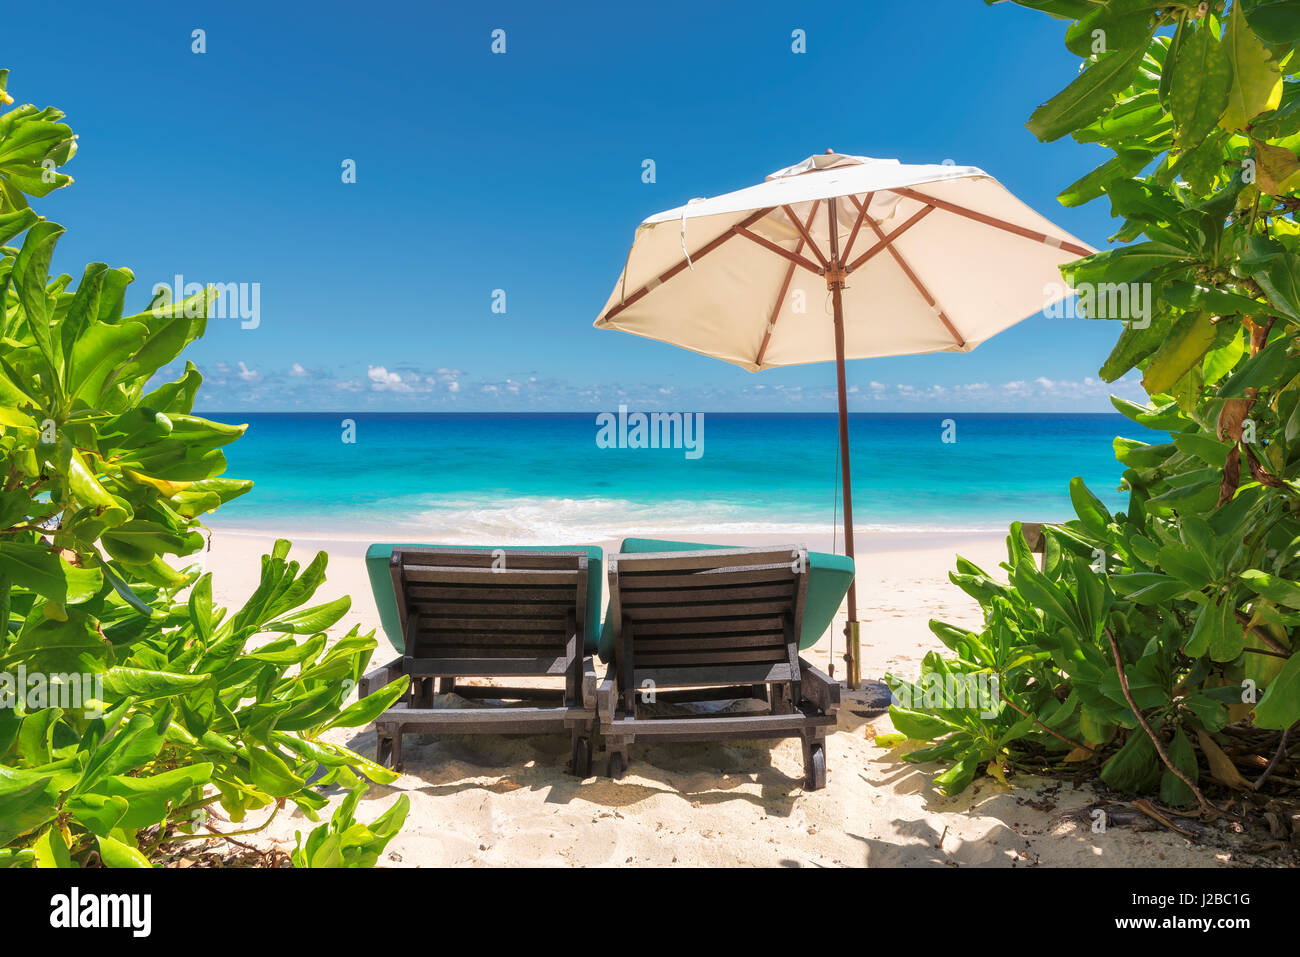 View over the amazing ocean beach with white sand, transparent turquoise water and umbrella and beach chair. Stock Photo